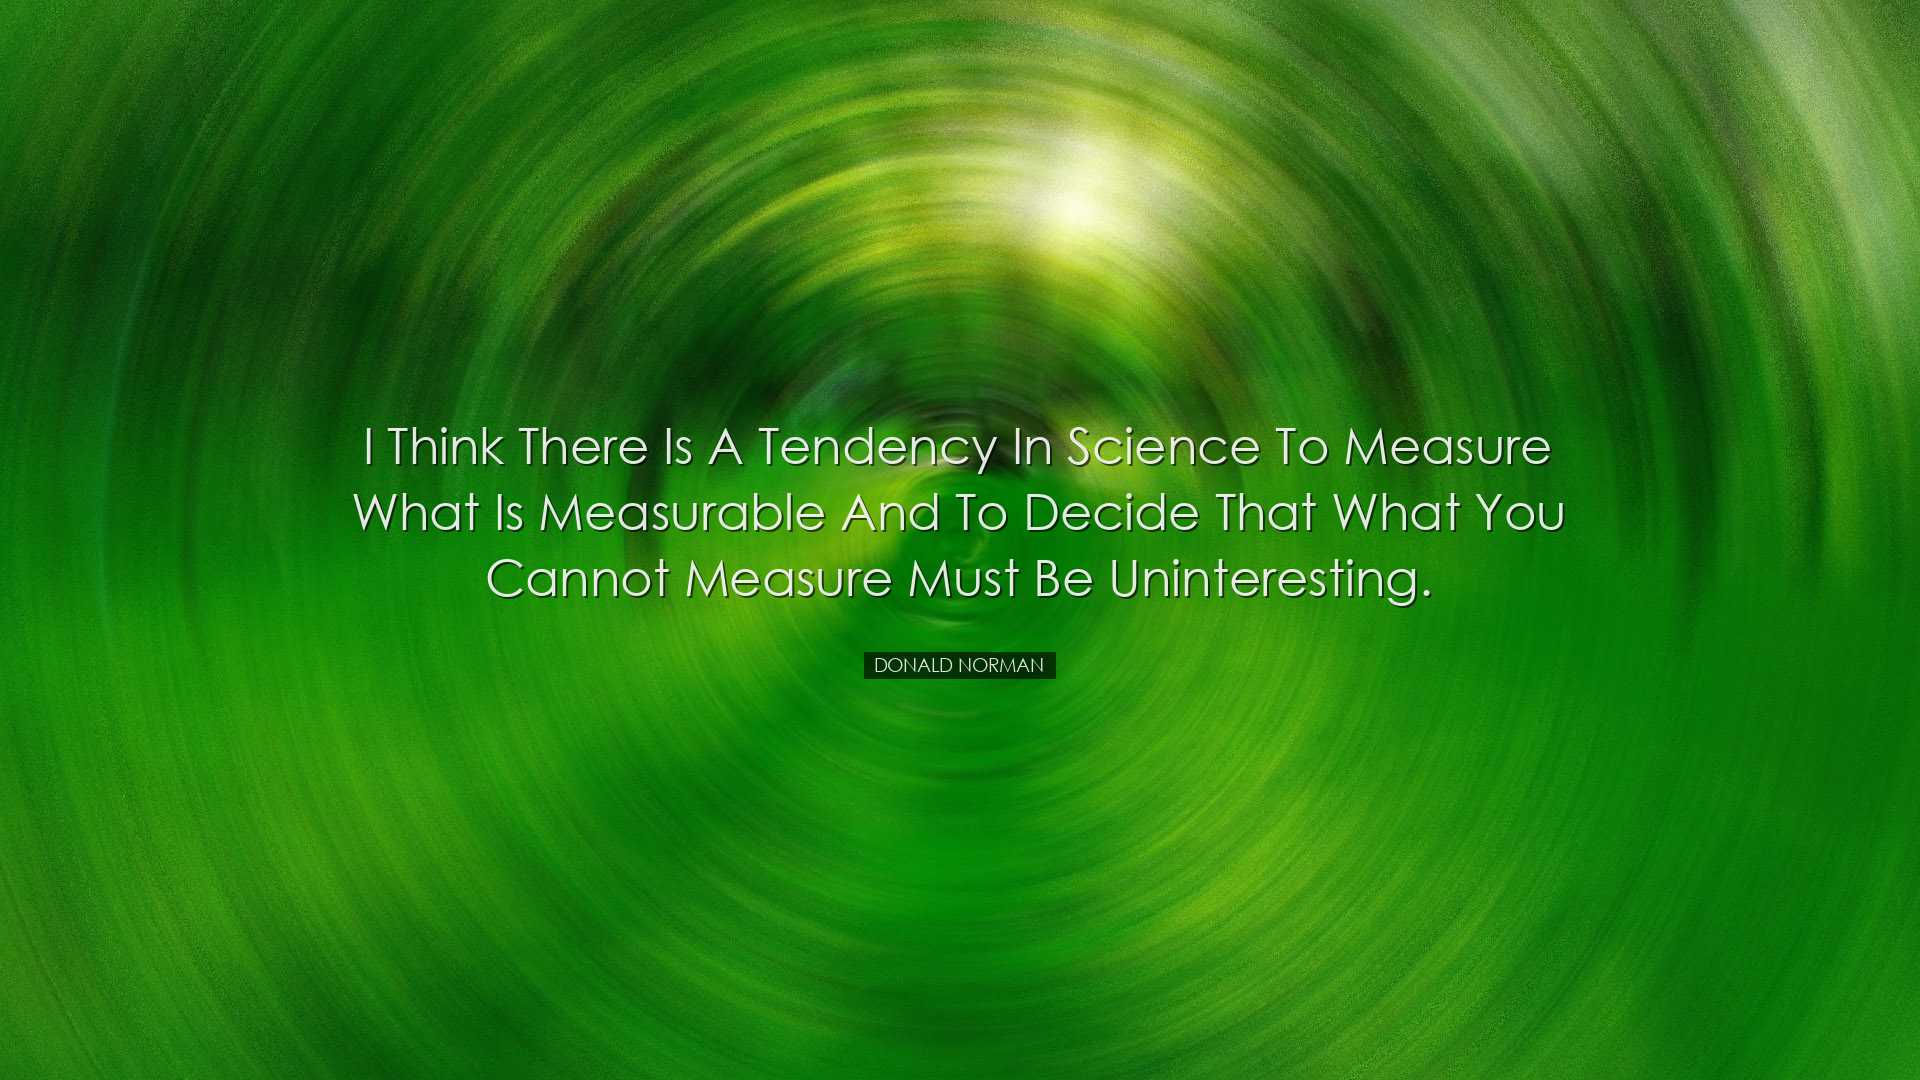 I think there is a tendency in science to measure what is measurab